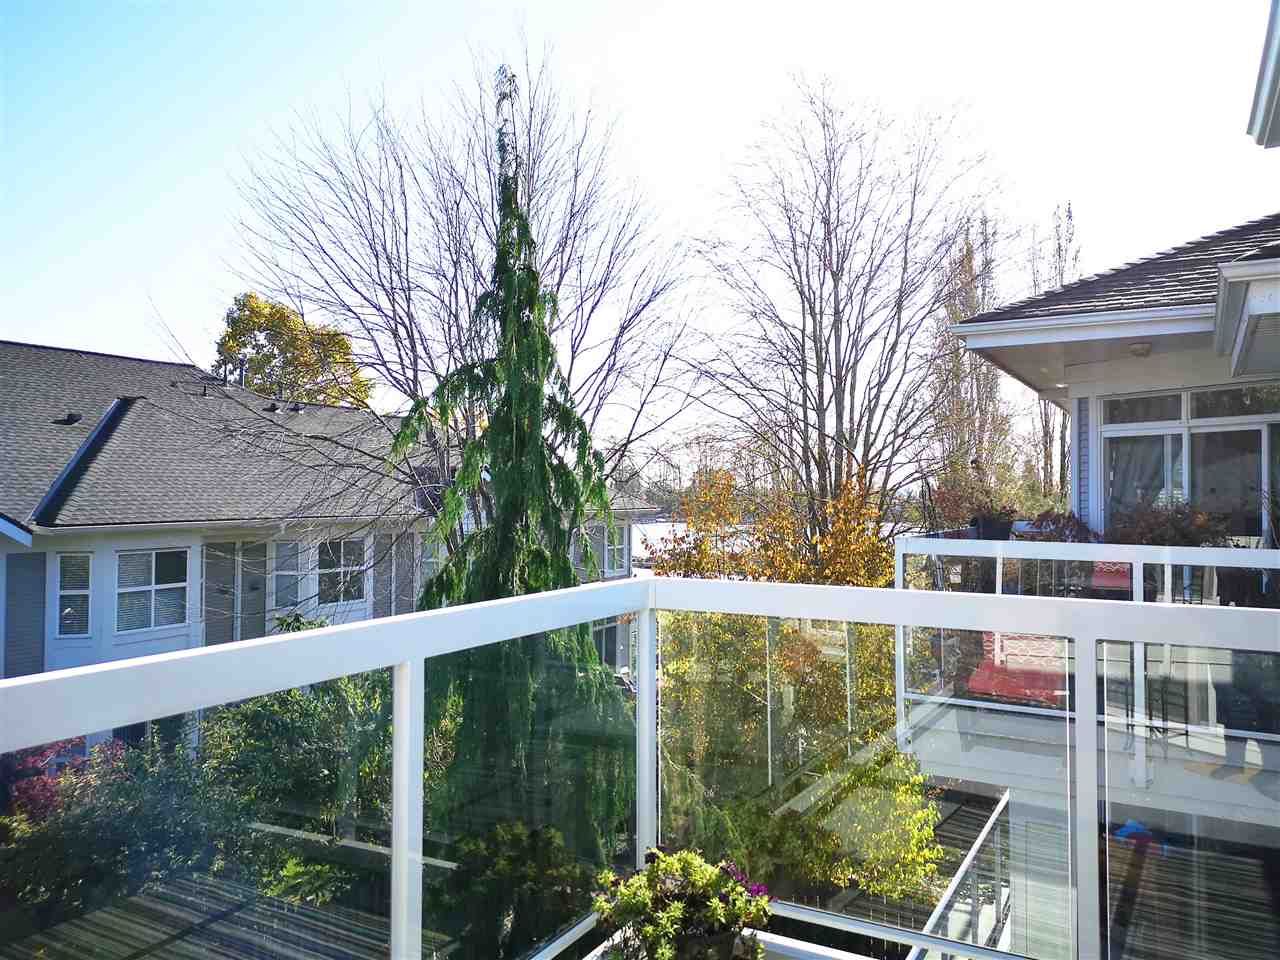 Main Photo: 306 3038 E KENT AVENUE in Vancouver: South Marine Condo for sale (Vancouver East)  : MLS®# R2418714